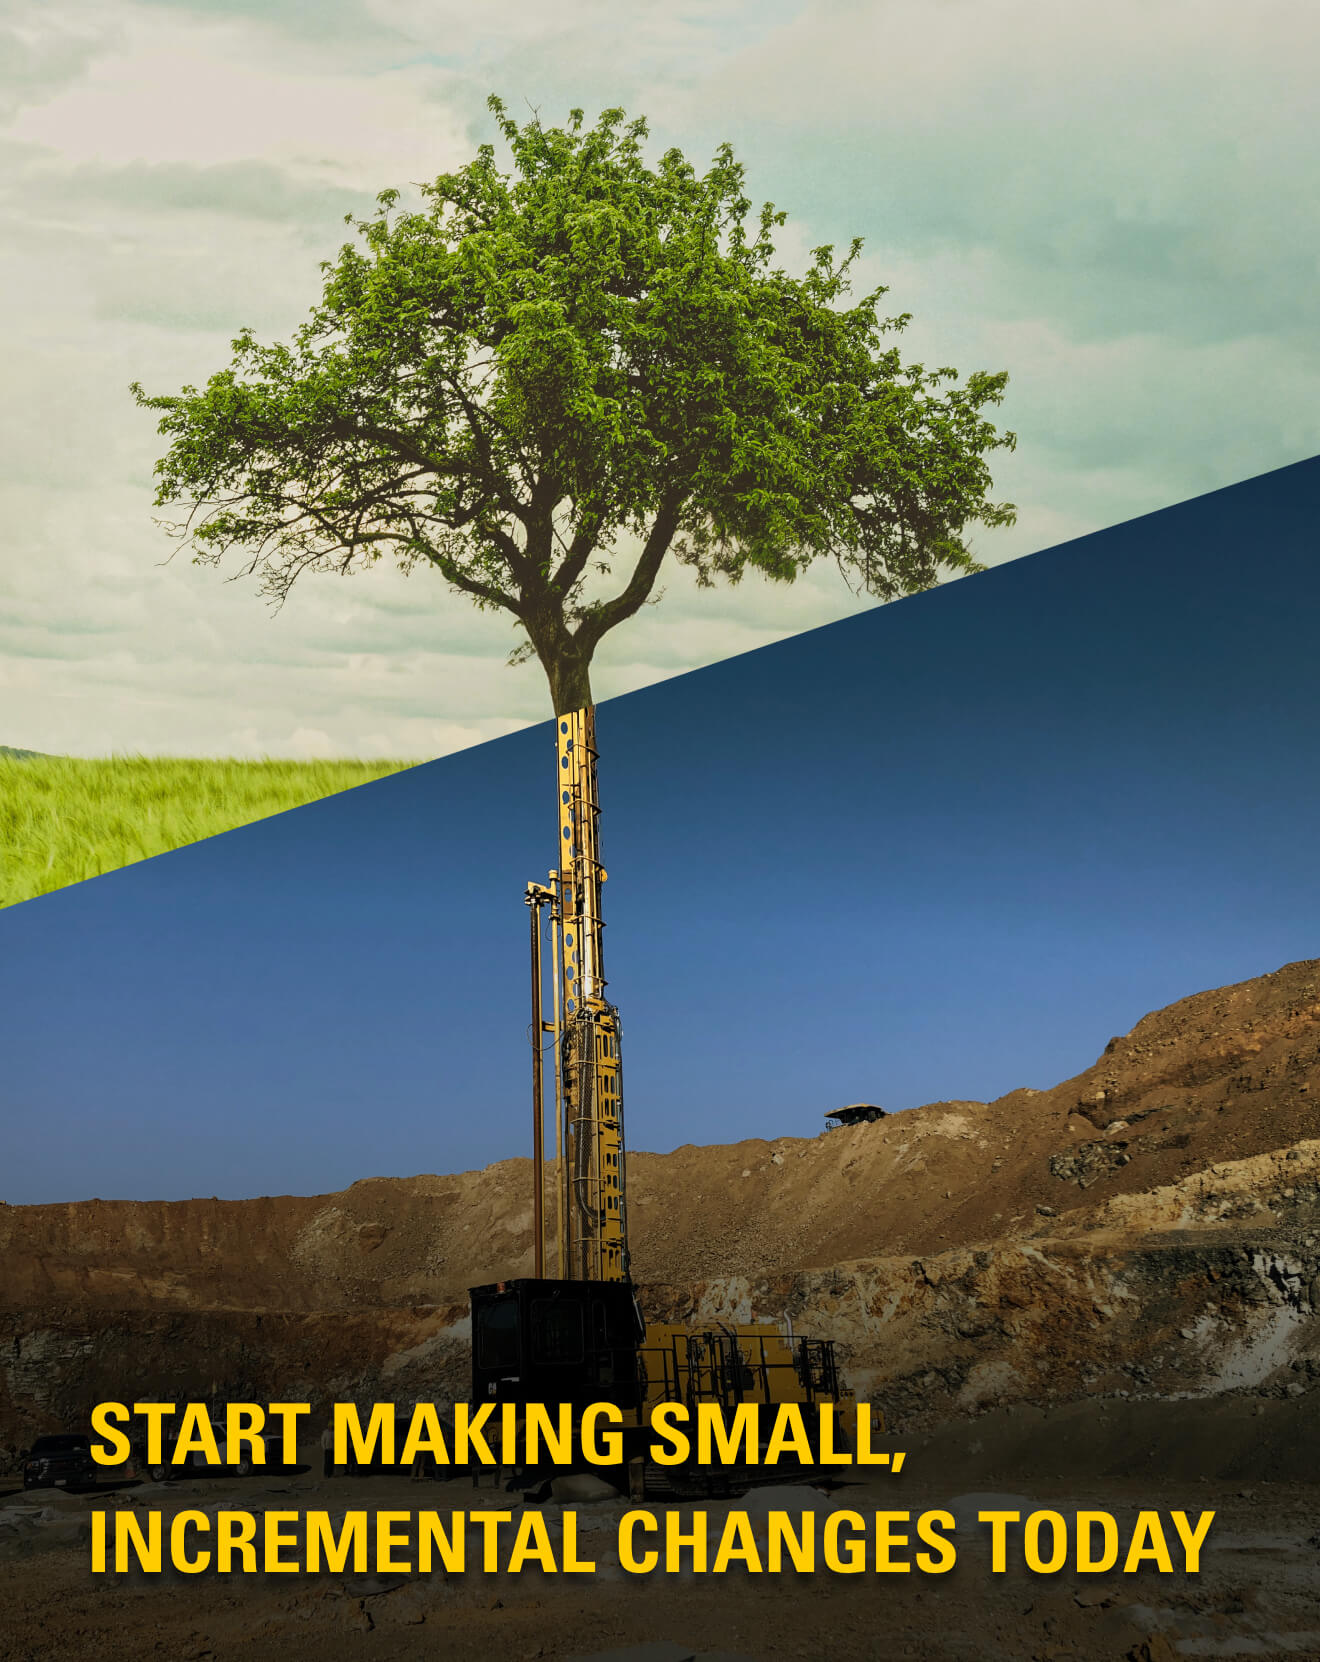 Start making small, incremental changes today